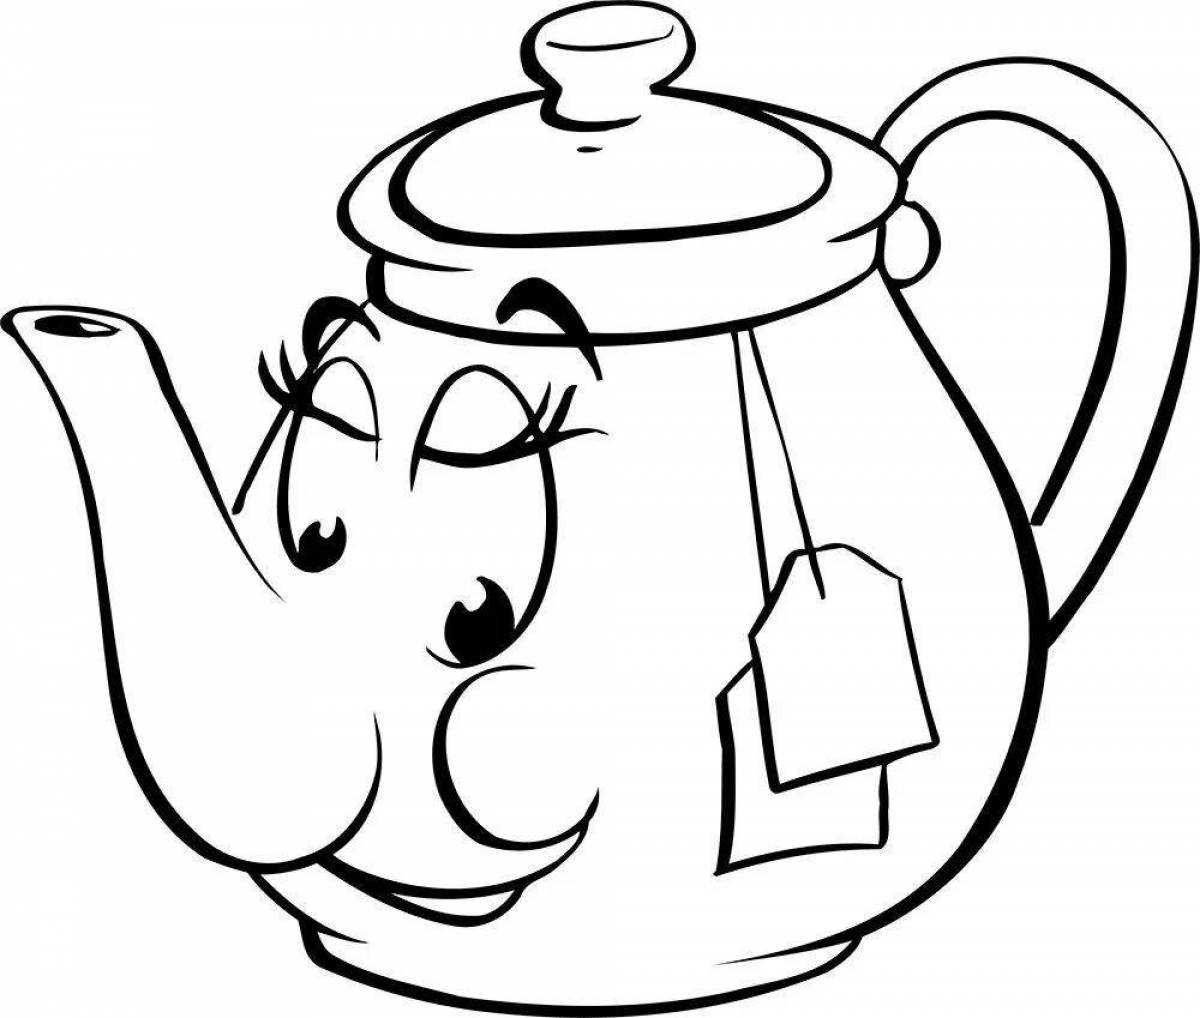 Sweet teapot coloring page for preschoolers